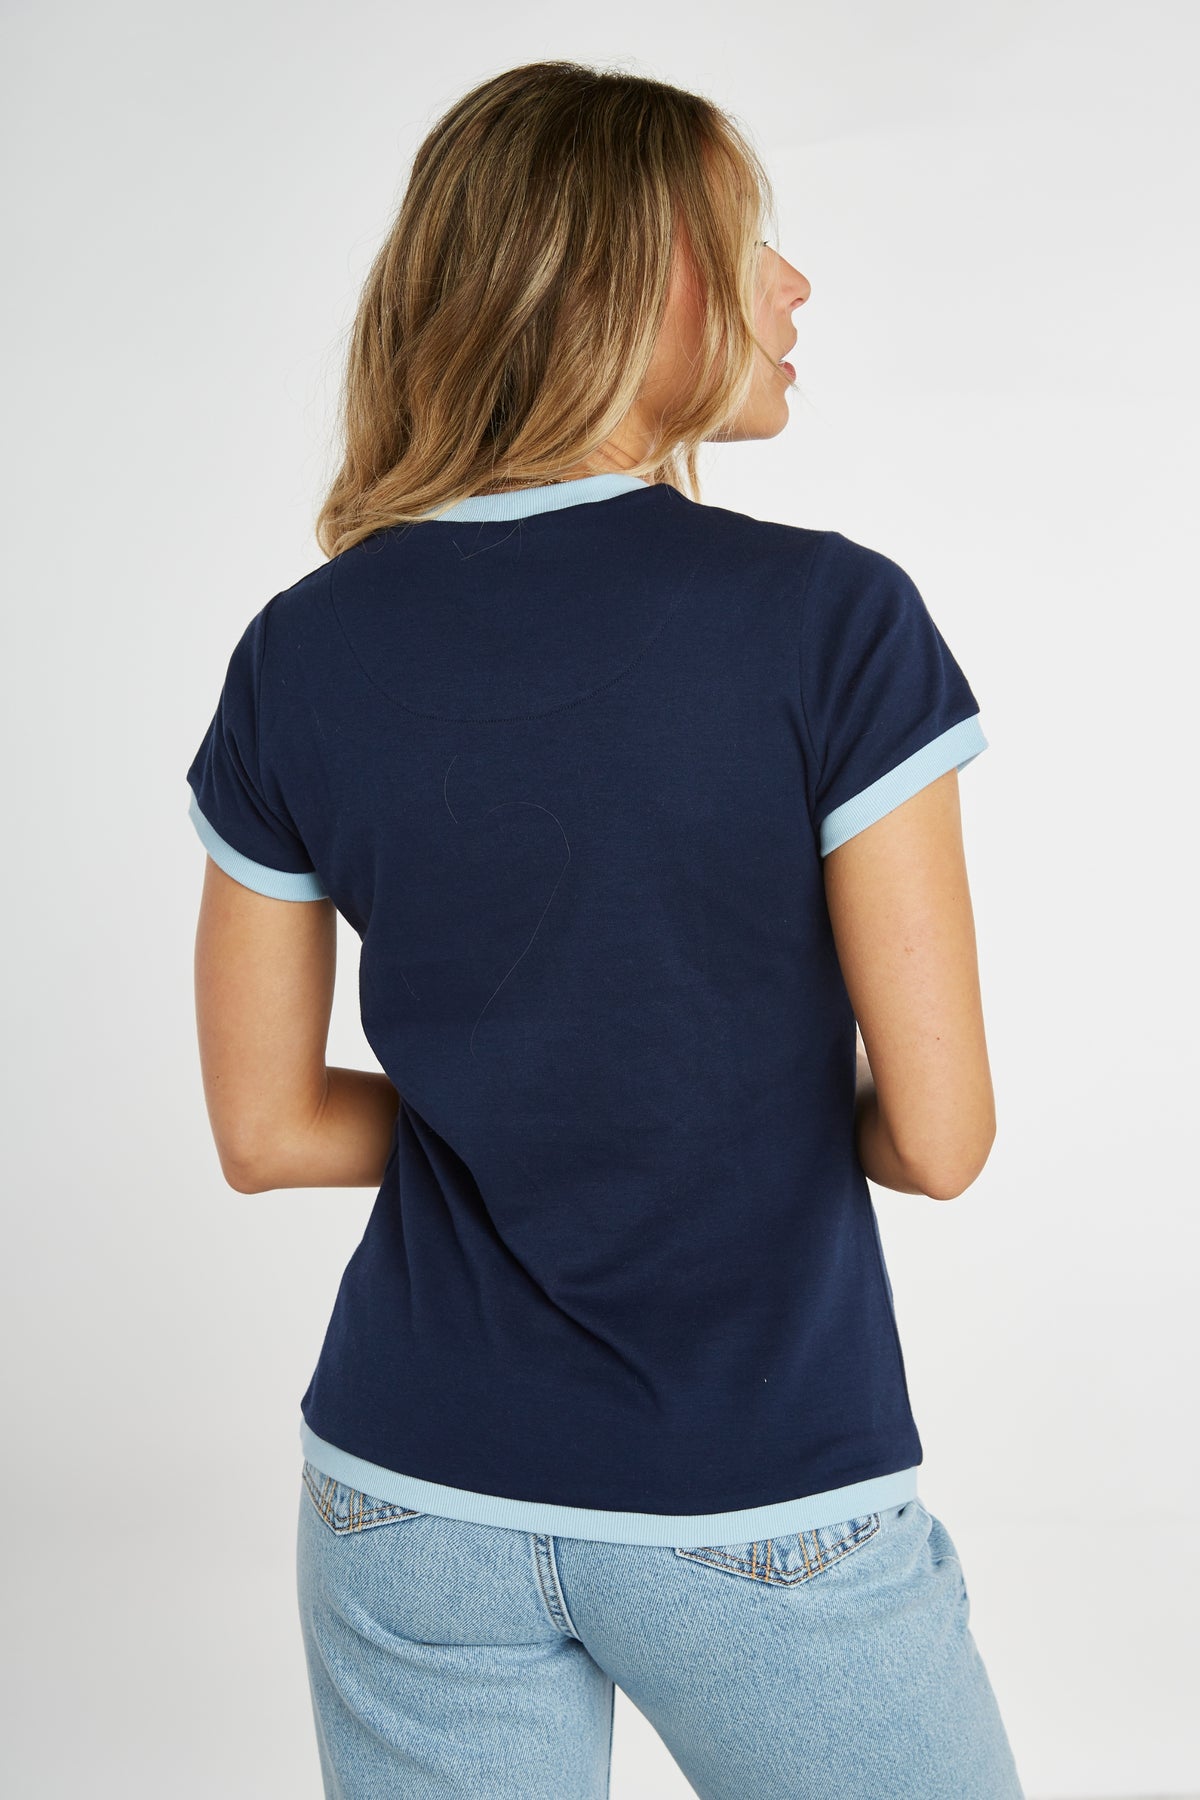 Brancaster T-Shirt - Navy - Whale Of A Time Clothing